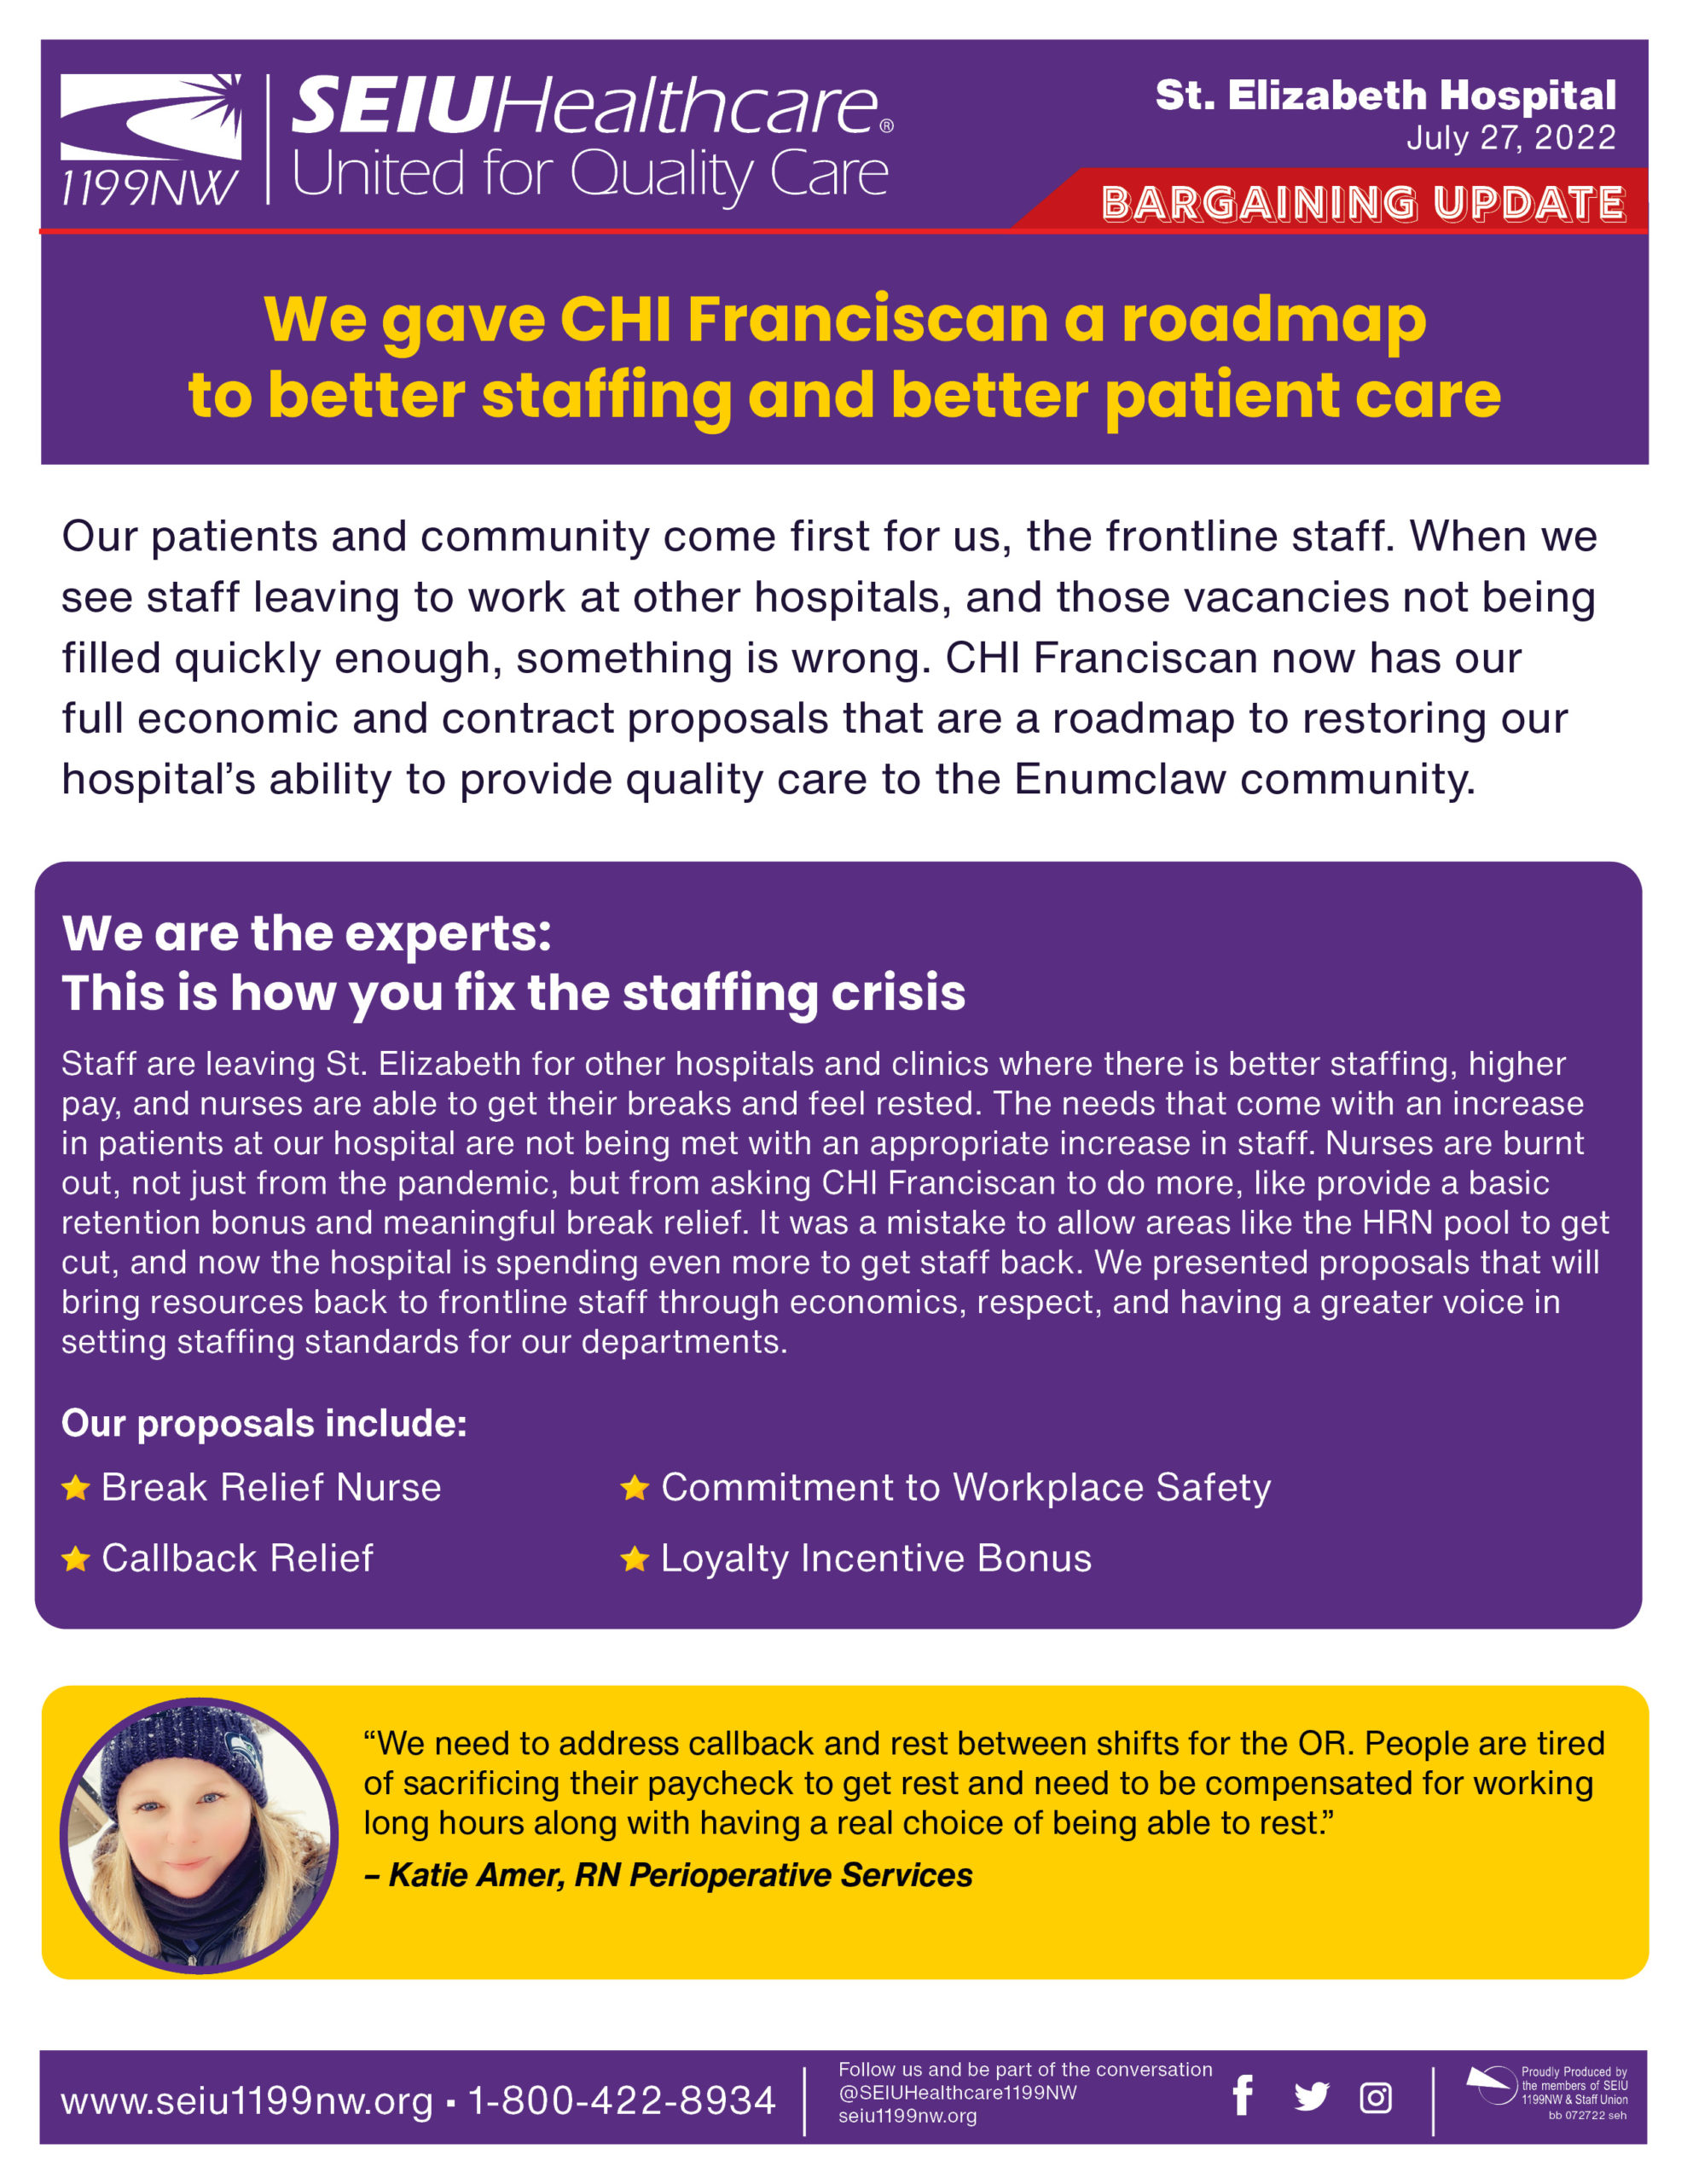 We gave CHI Franciscan a roadmap to better staffing and better patient care